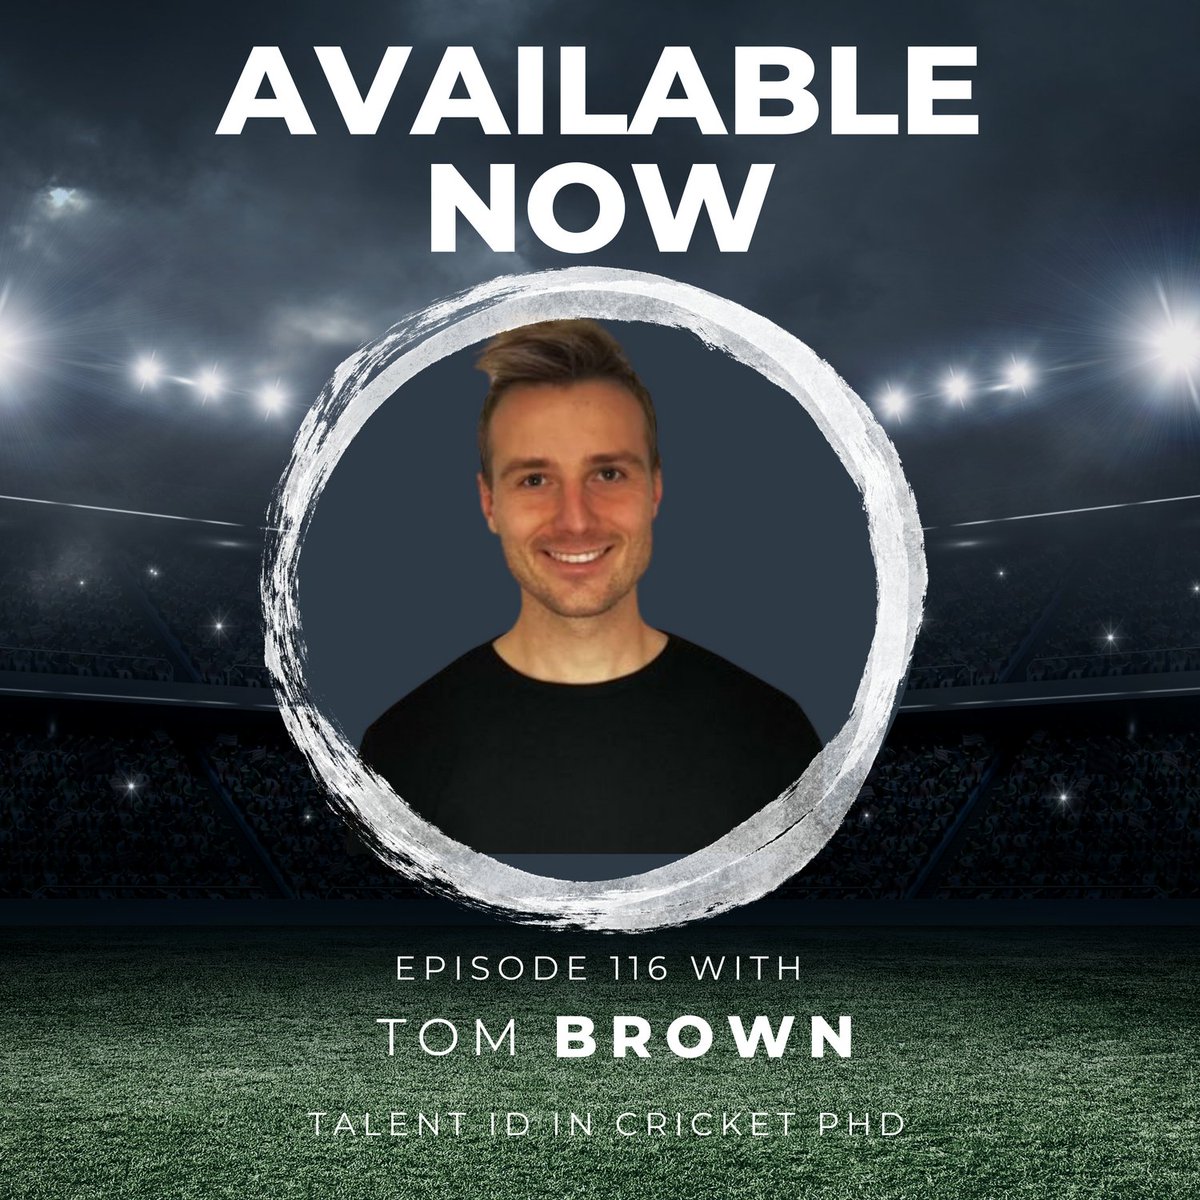 ❗️LIVE❗️E116 with former player, turned researcher, Tom Brown is live. He discusses his research into Talent ID within the ECB pathway and barriers facing the South Asian community in it. Links below👇

tinyurl.com/bdd77a95
tinyurl.com/2p8bwm4j

@tombrown1593 

#ENGPAK